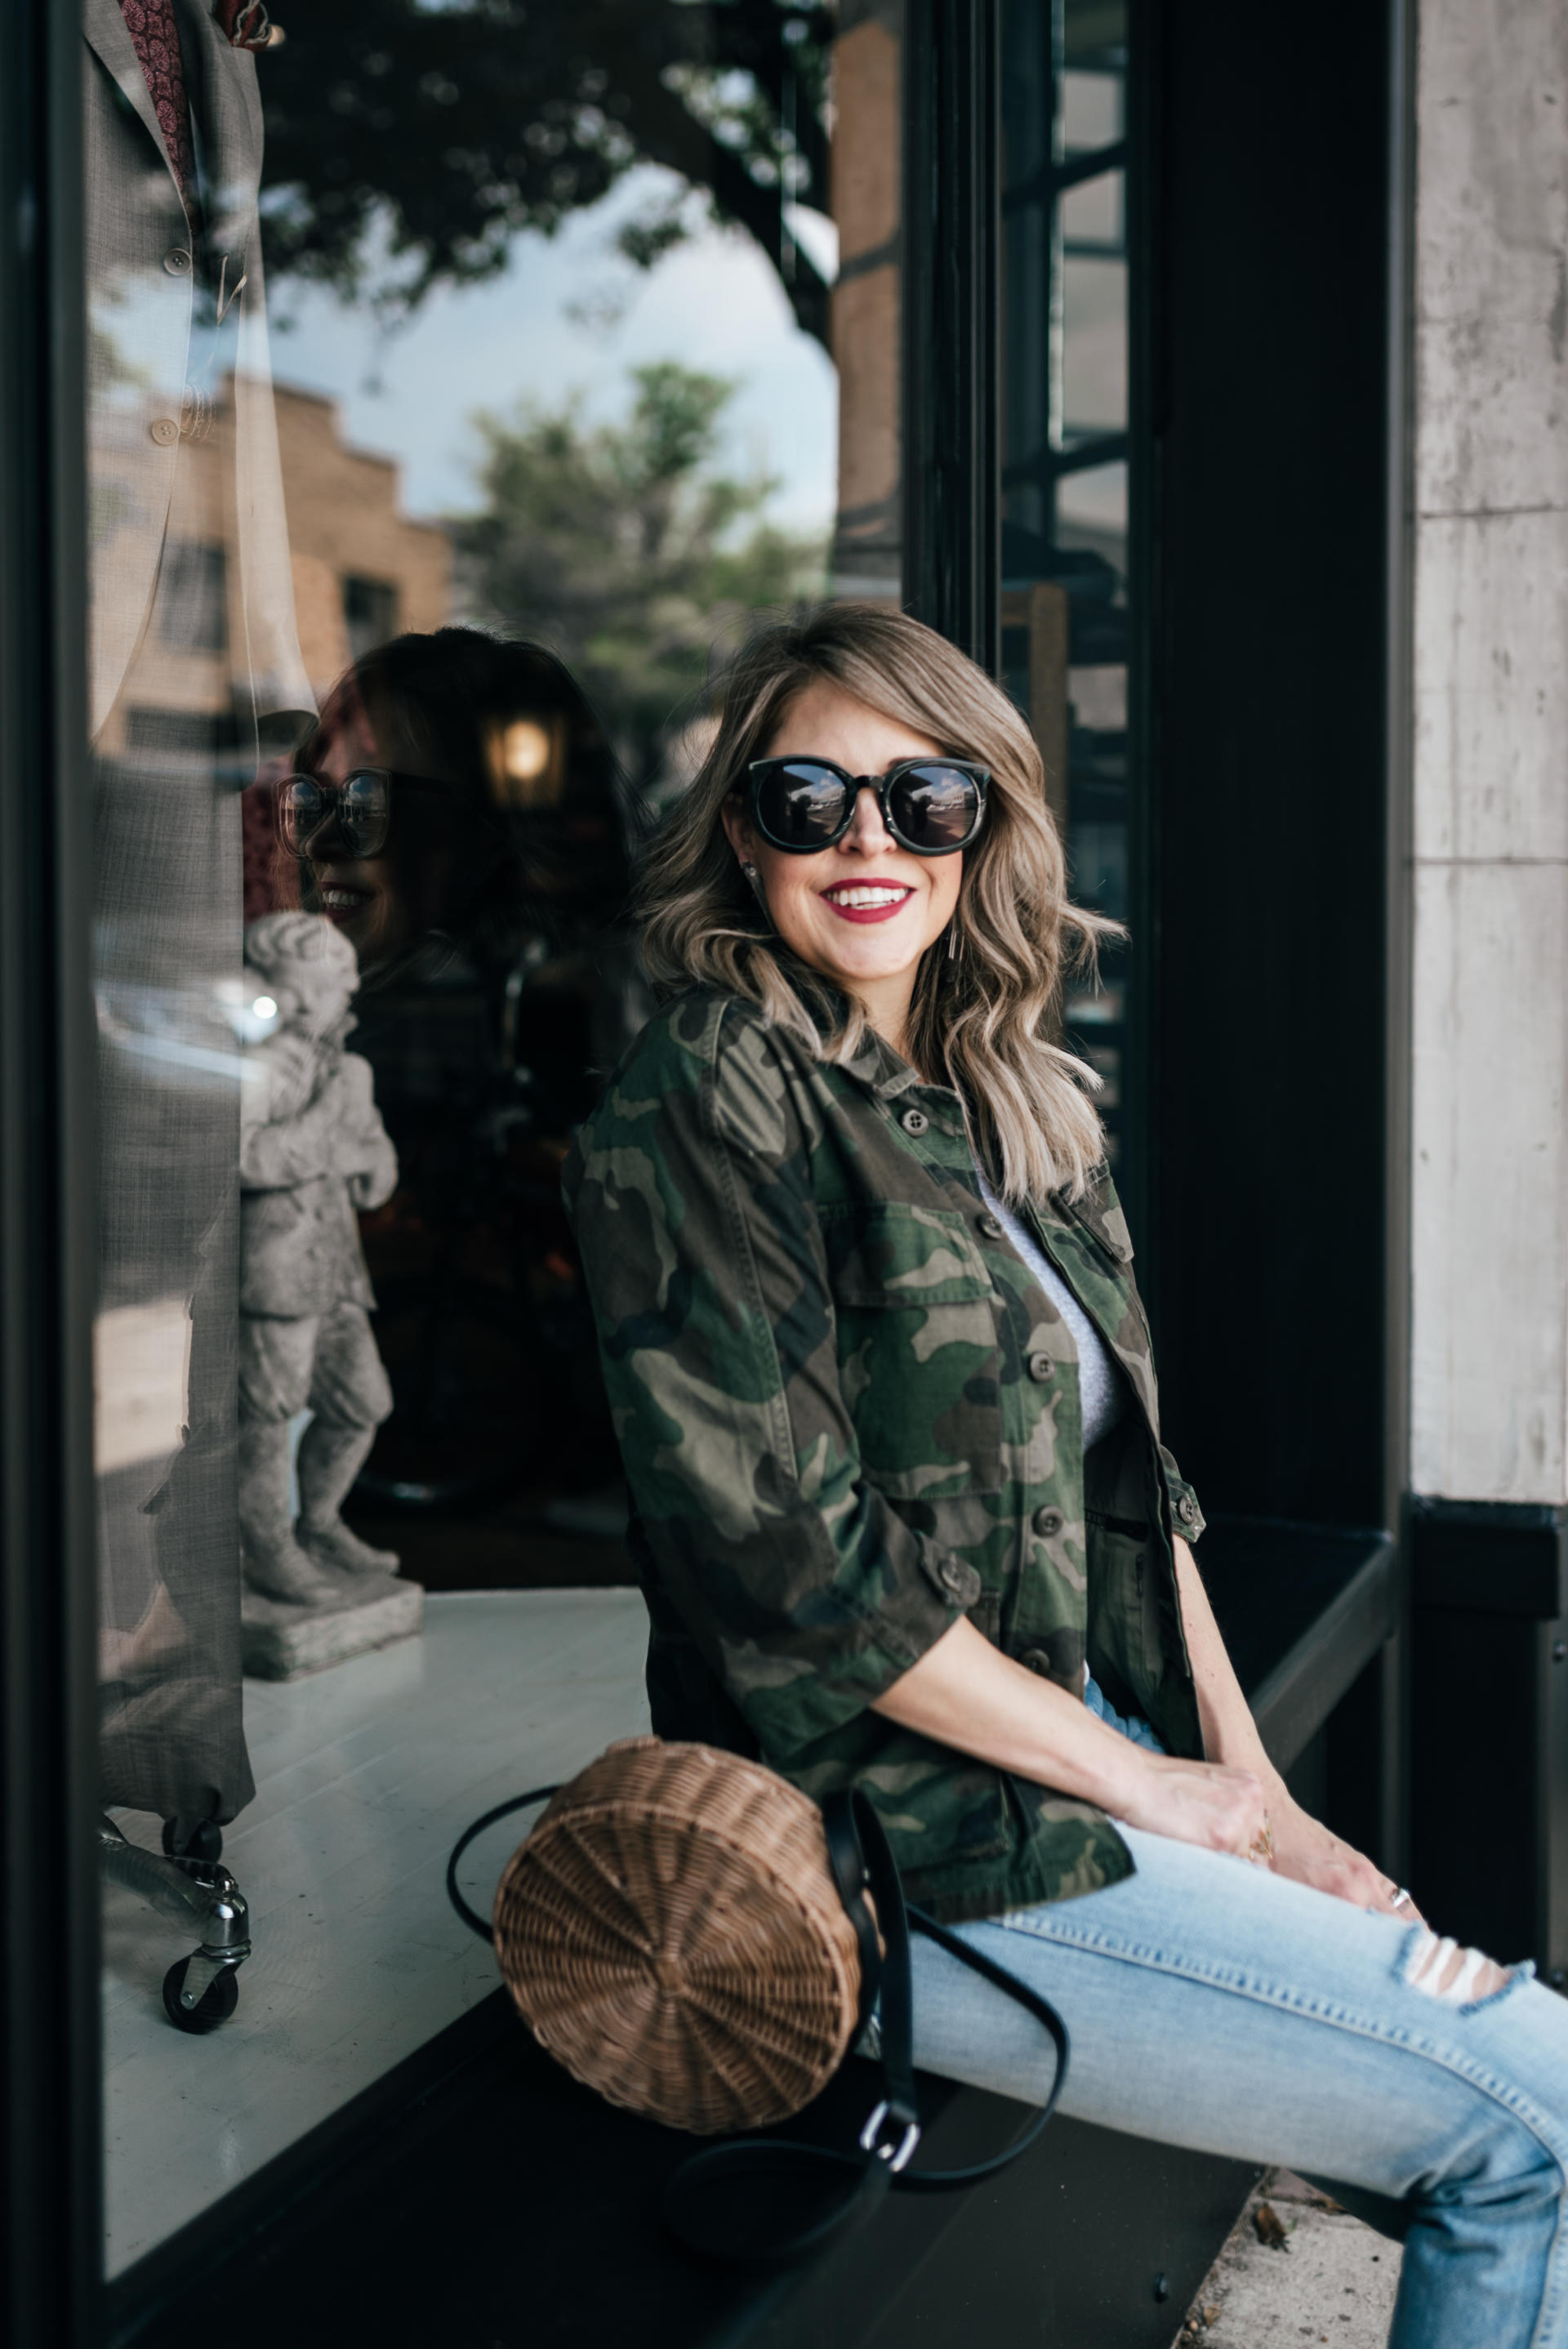 Bookmark this post to see how to style this camo jacket for much less!